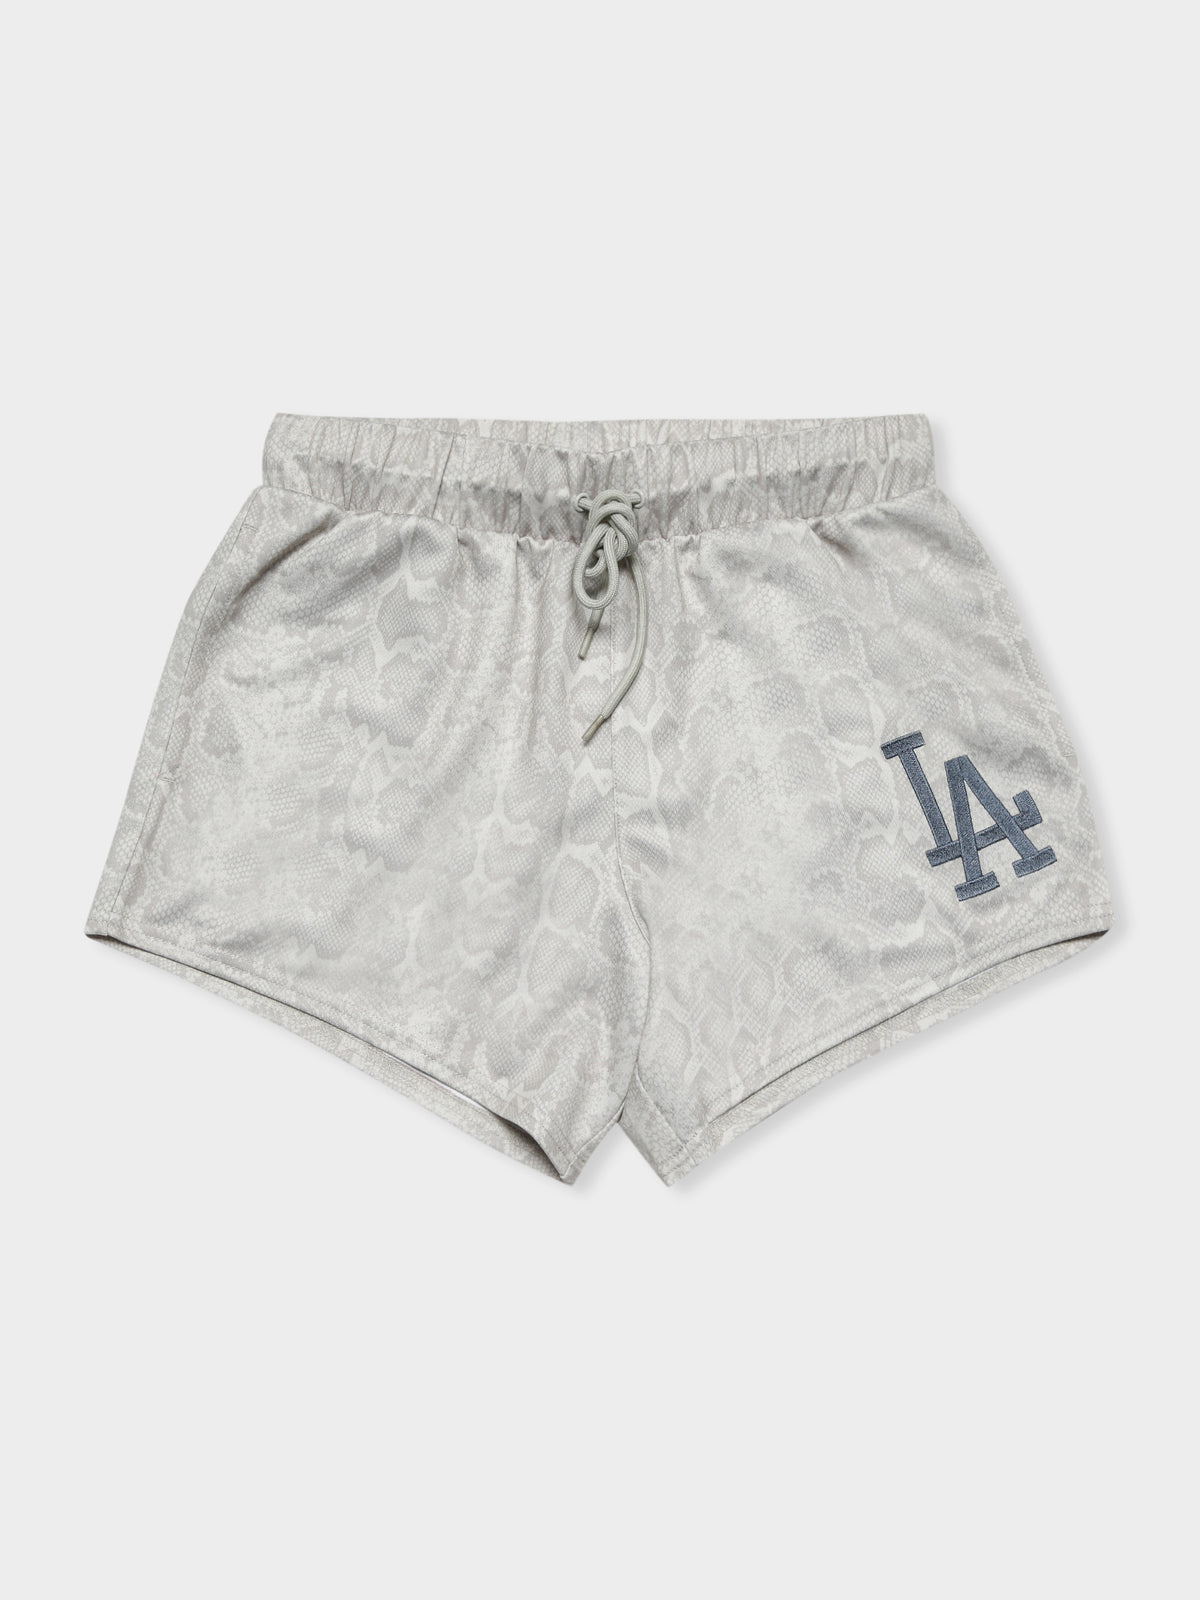 Animal Rumble Shorts in Silver Grey